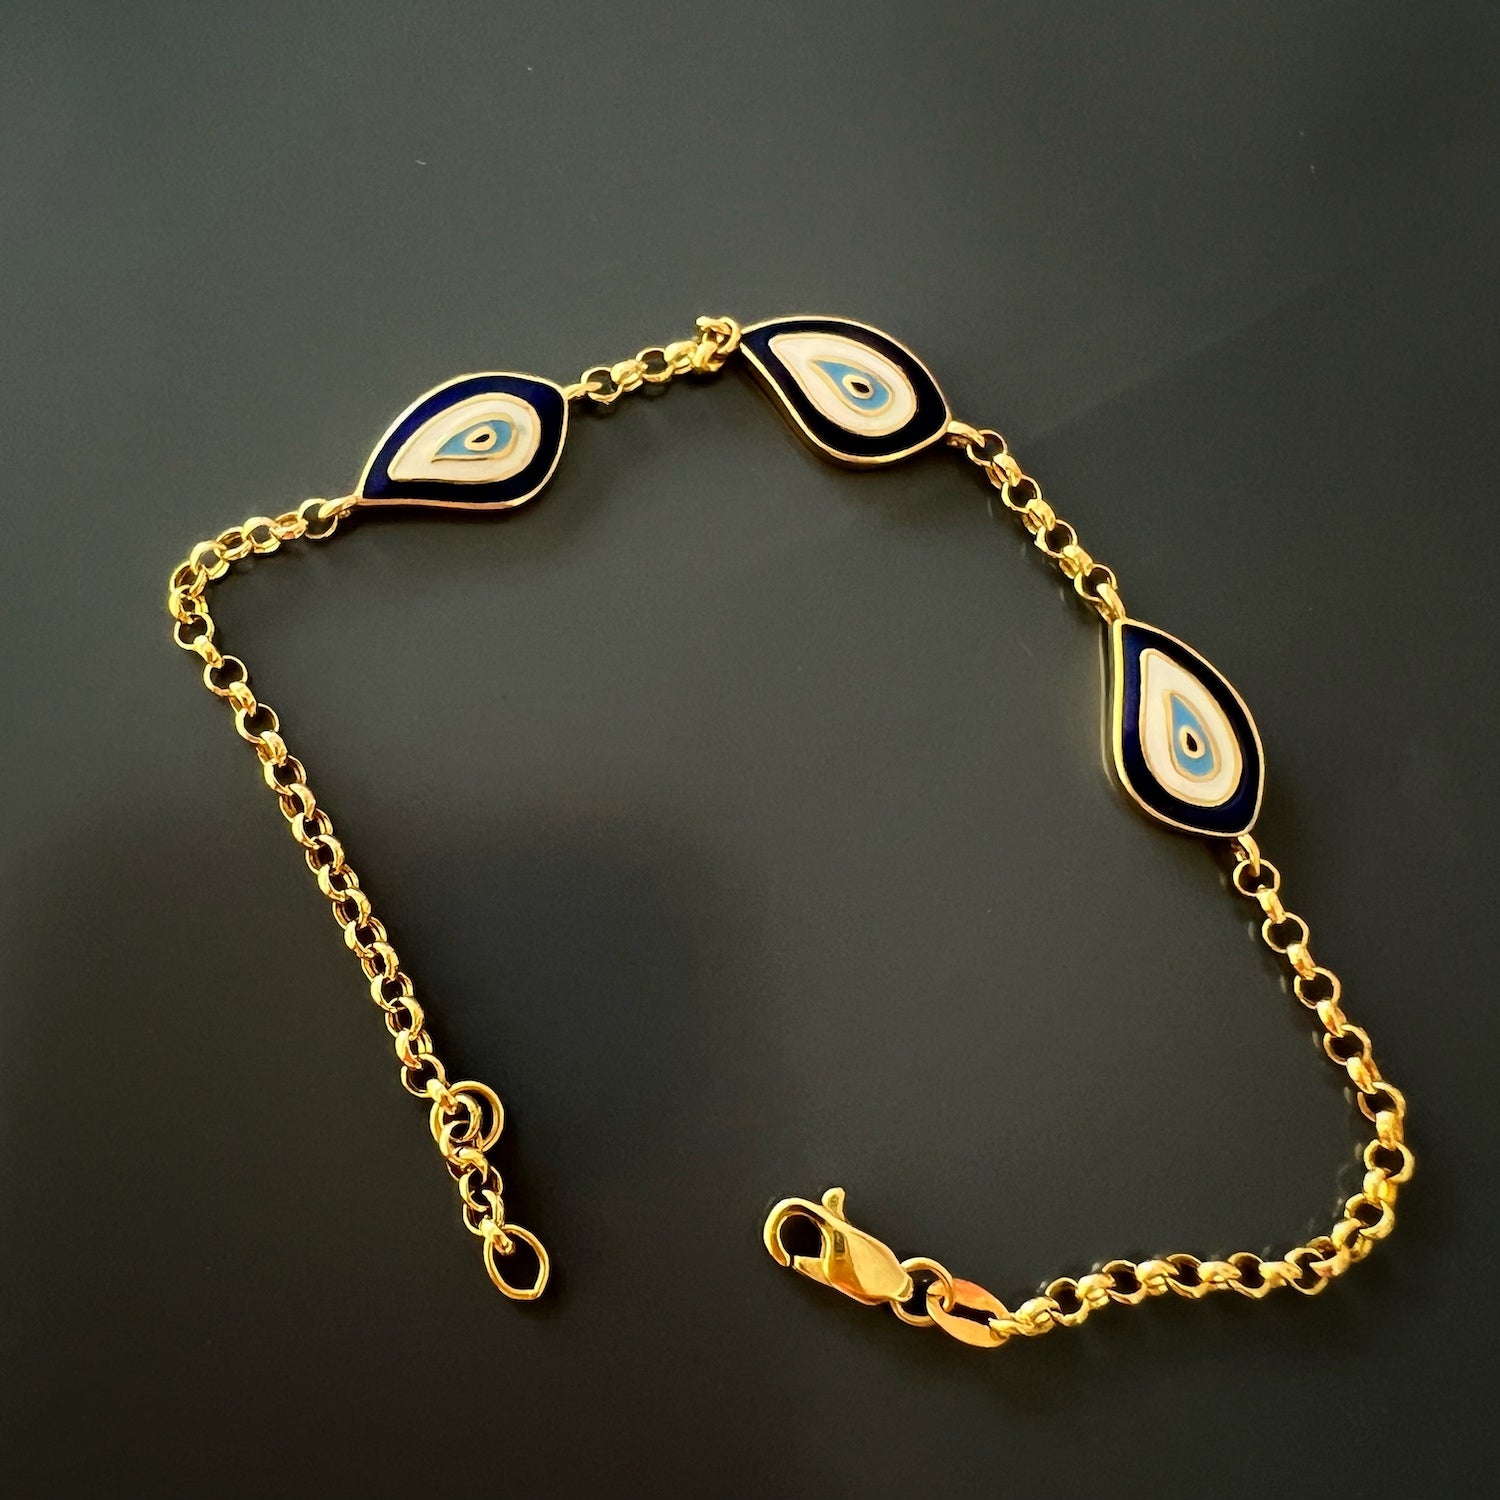 Handcrafted Gold Evil Eye Bracelet - An artistic image highlighting the intricate craftsmanship of the Gold Teardrop Lucky Evil Eye Bracelet, featuring the delicate evil eye charms and vibrant blue enamel.